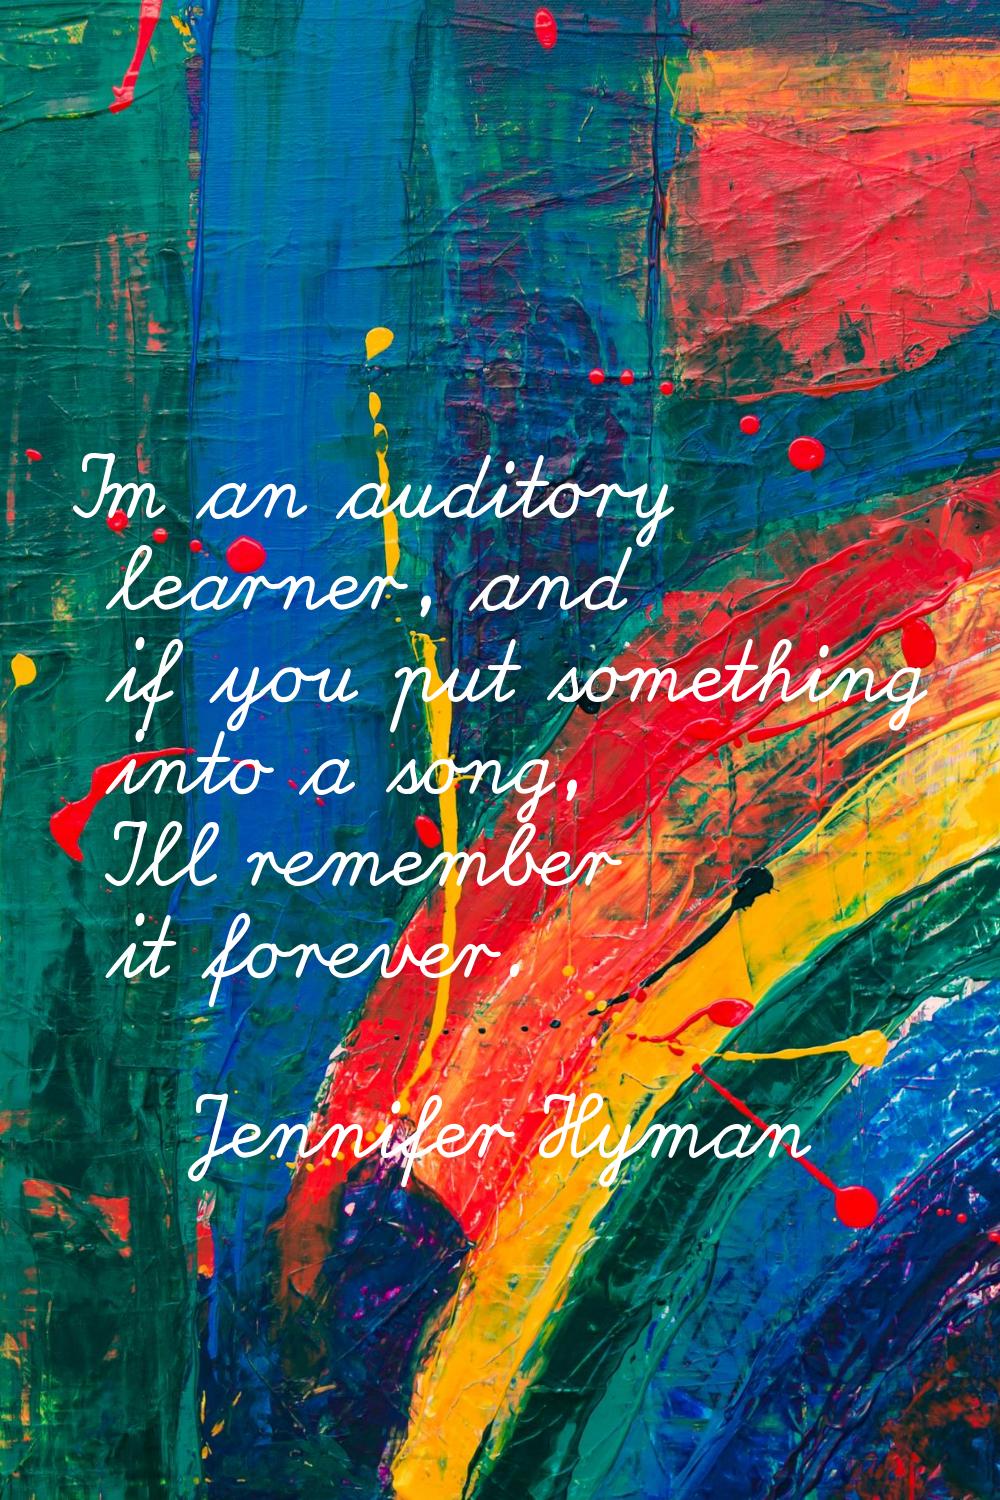 I'm an auditory learner, and if you put something into a song, I'll remember it forever.